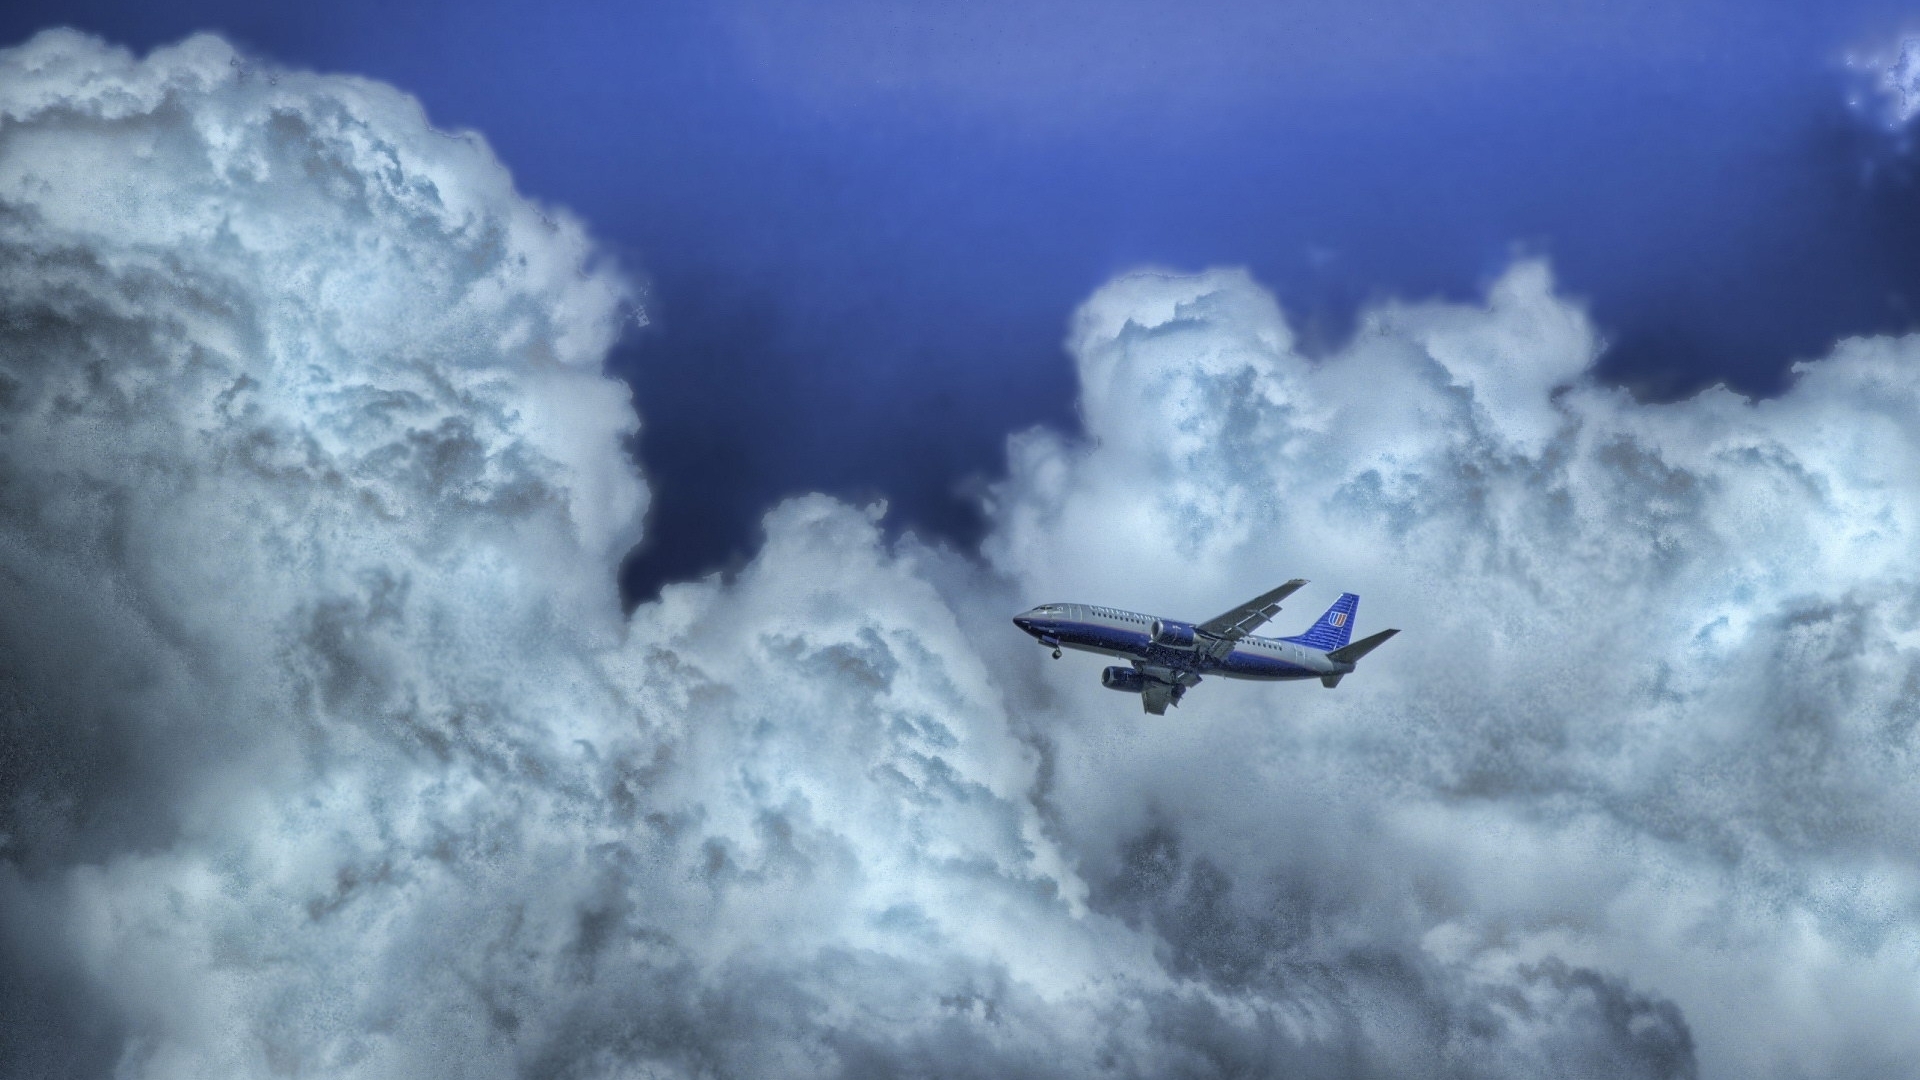 Windows Backgrounds transport, sky, clouds, airplanes, blue